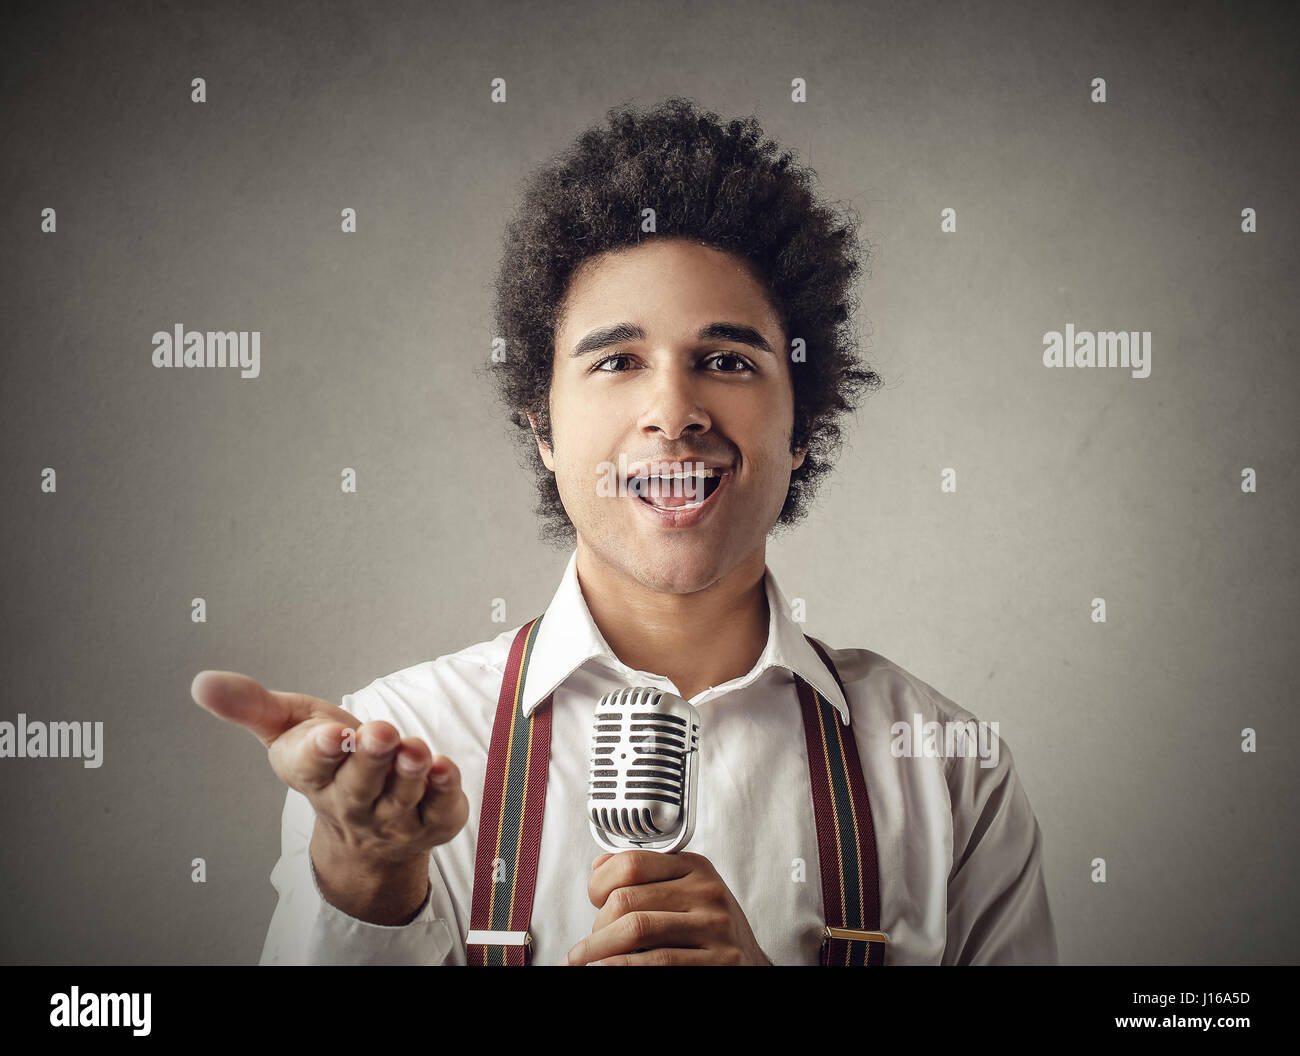 Young man talking with microphone Stock Photo